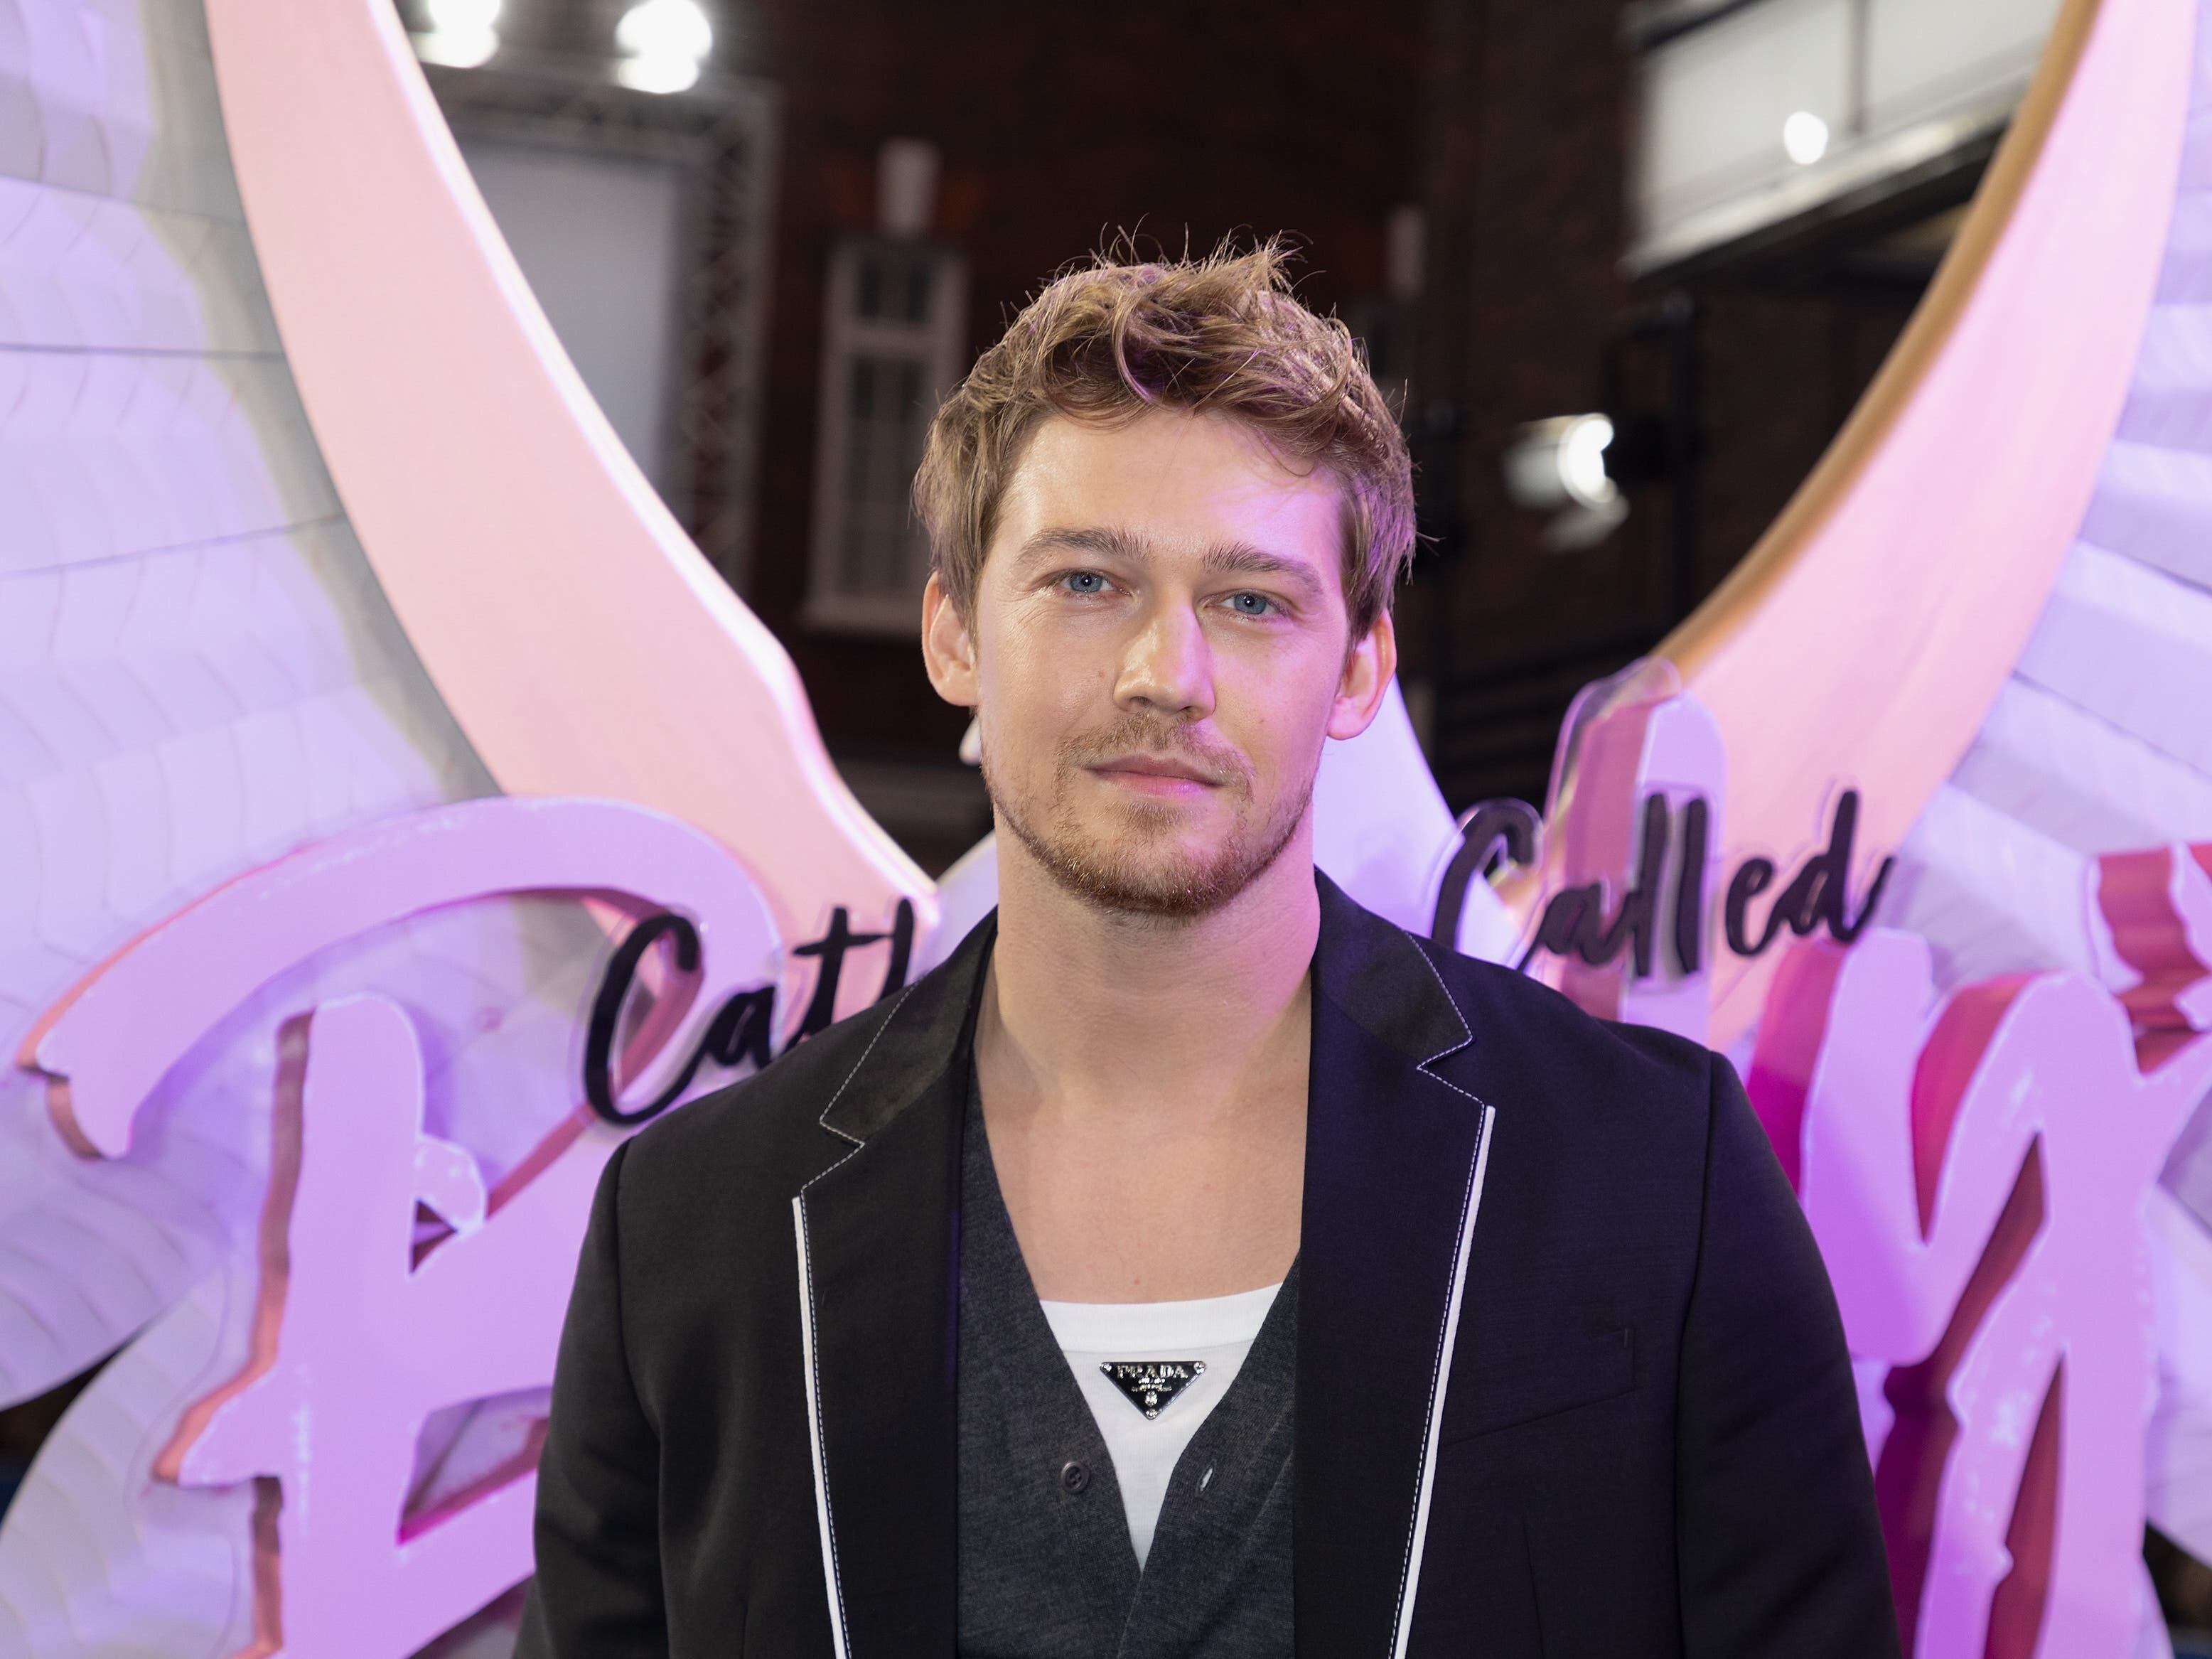 Joe Alwyn on Taylor Swift and whether he has ever been to Vauxhall